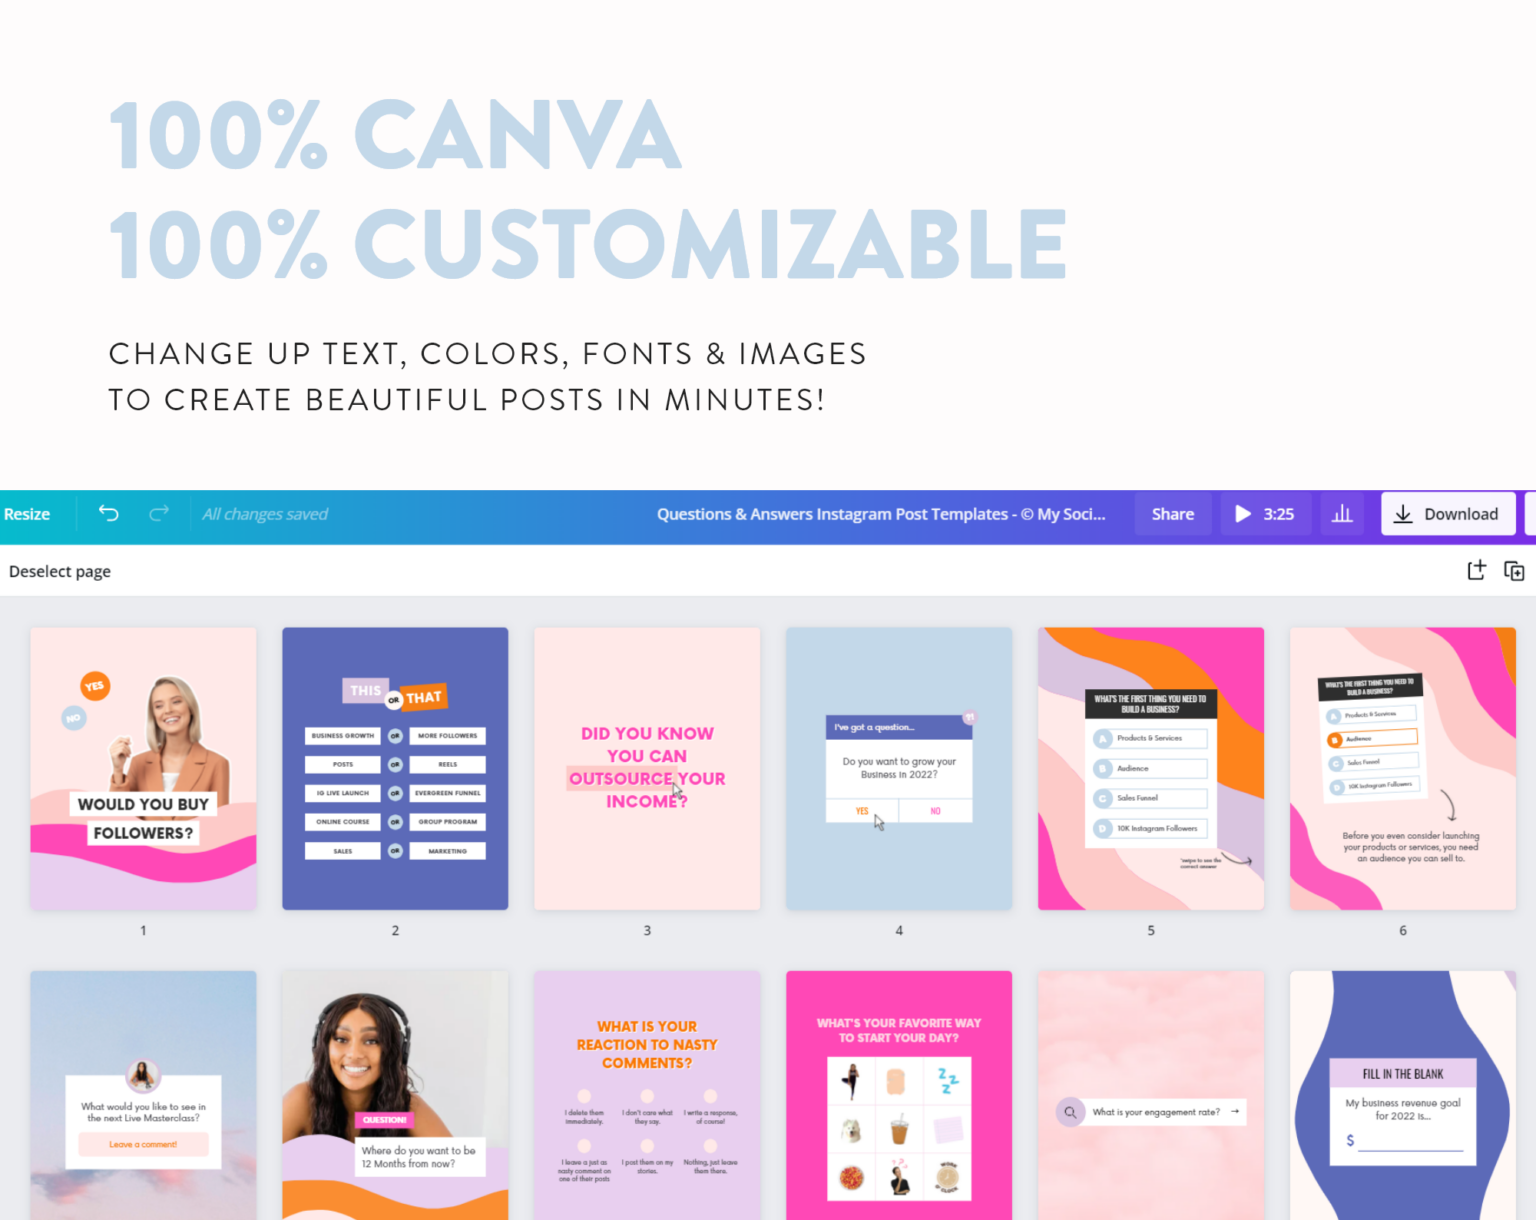 Questions-answers-Instagram-templates-for-canva-customizable